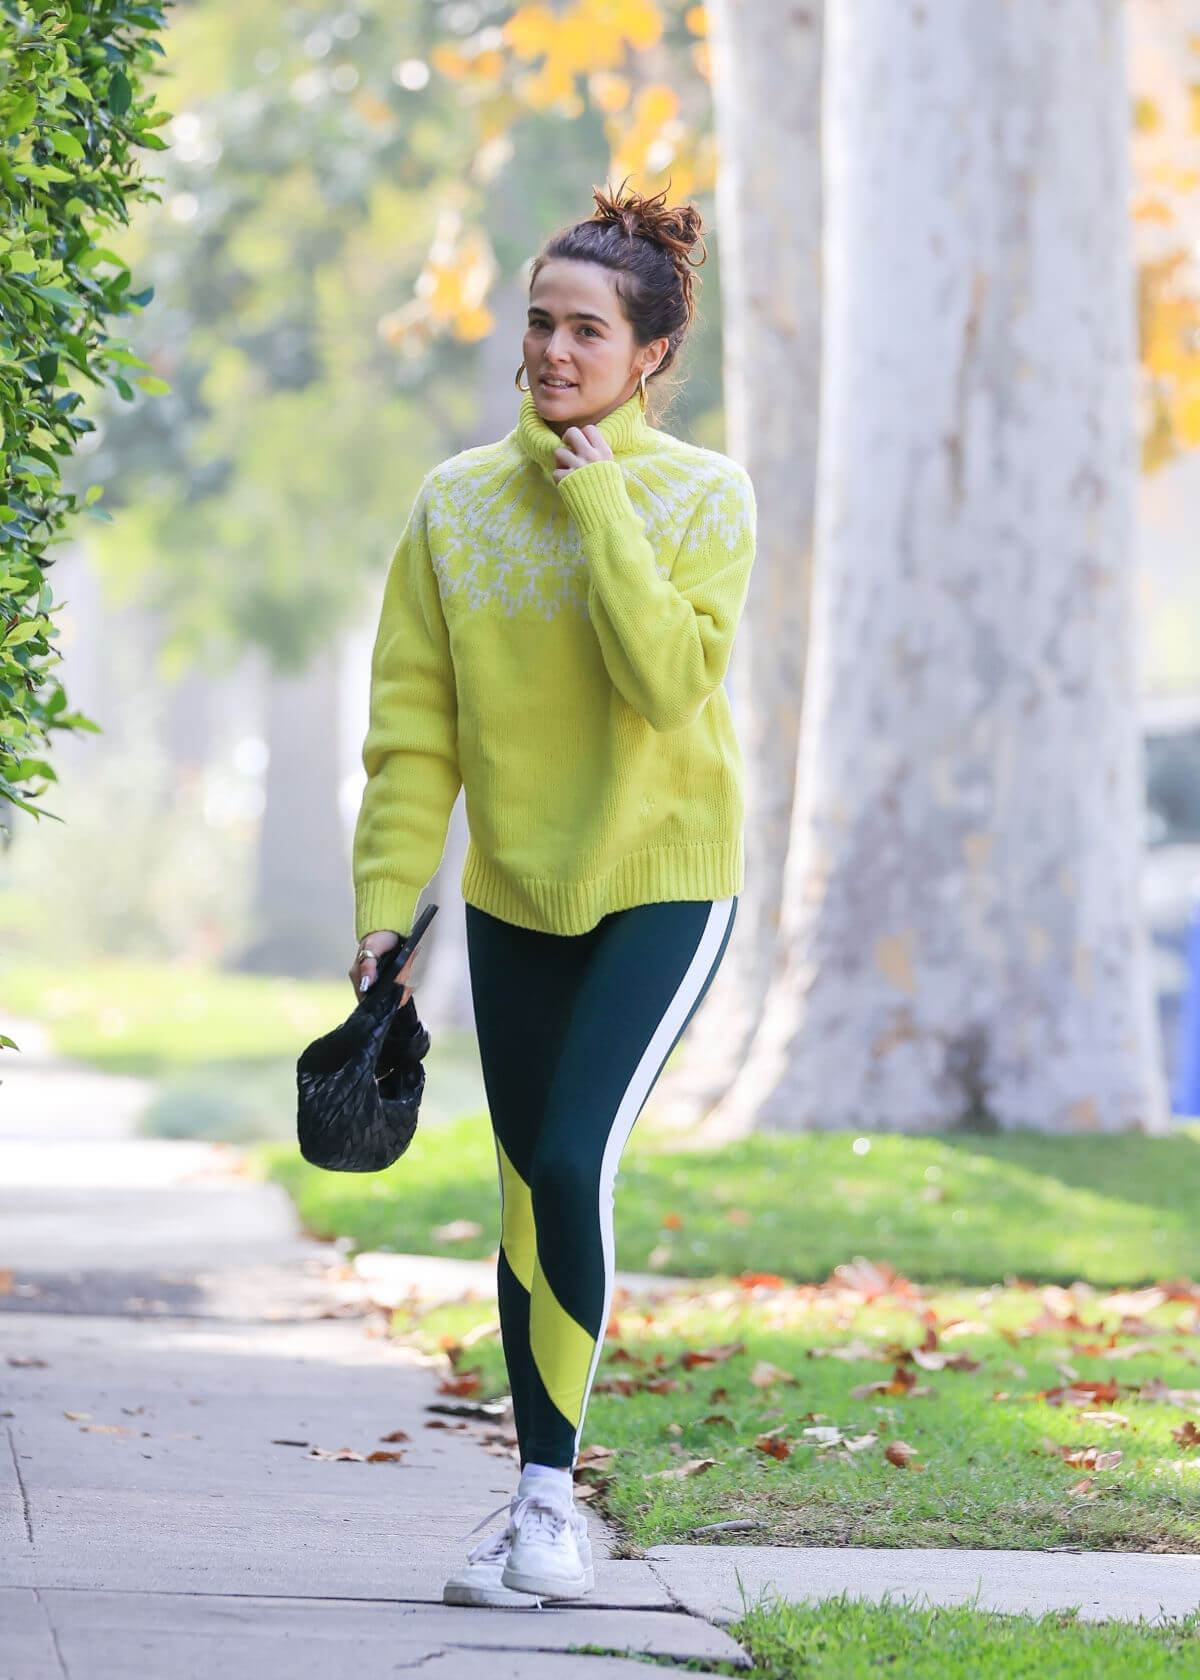 Zoey Deutch in High Neck with Tights at Pilates Class in West Hollywood 11/19/2021